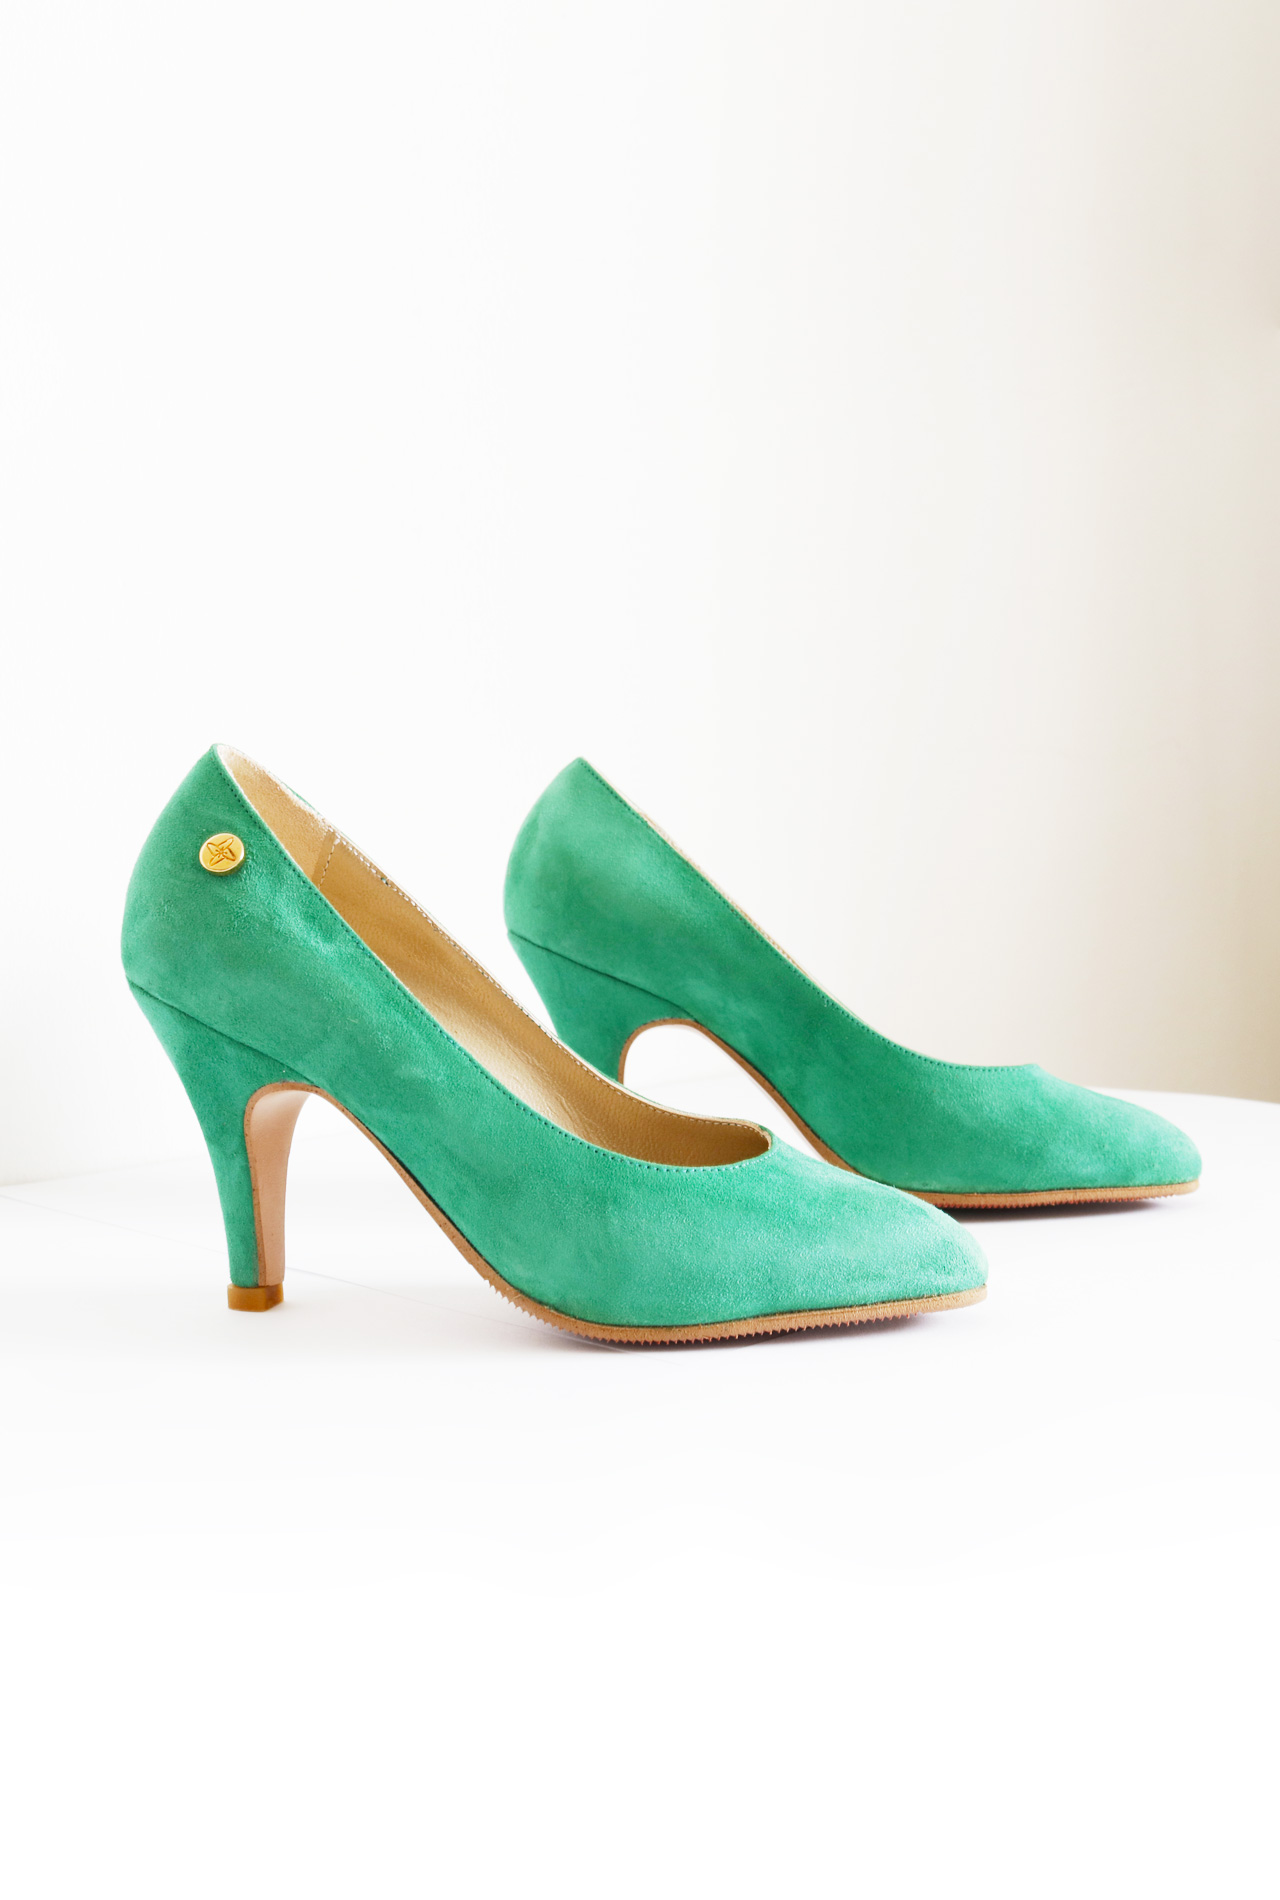 emerald green suede shoes